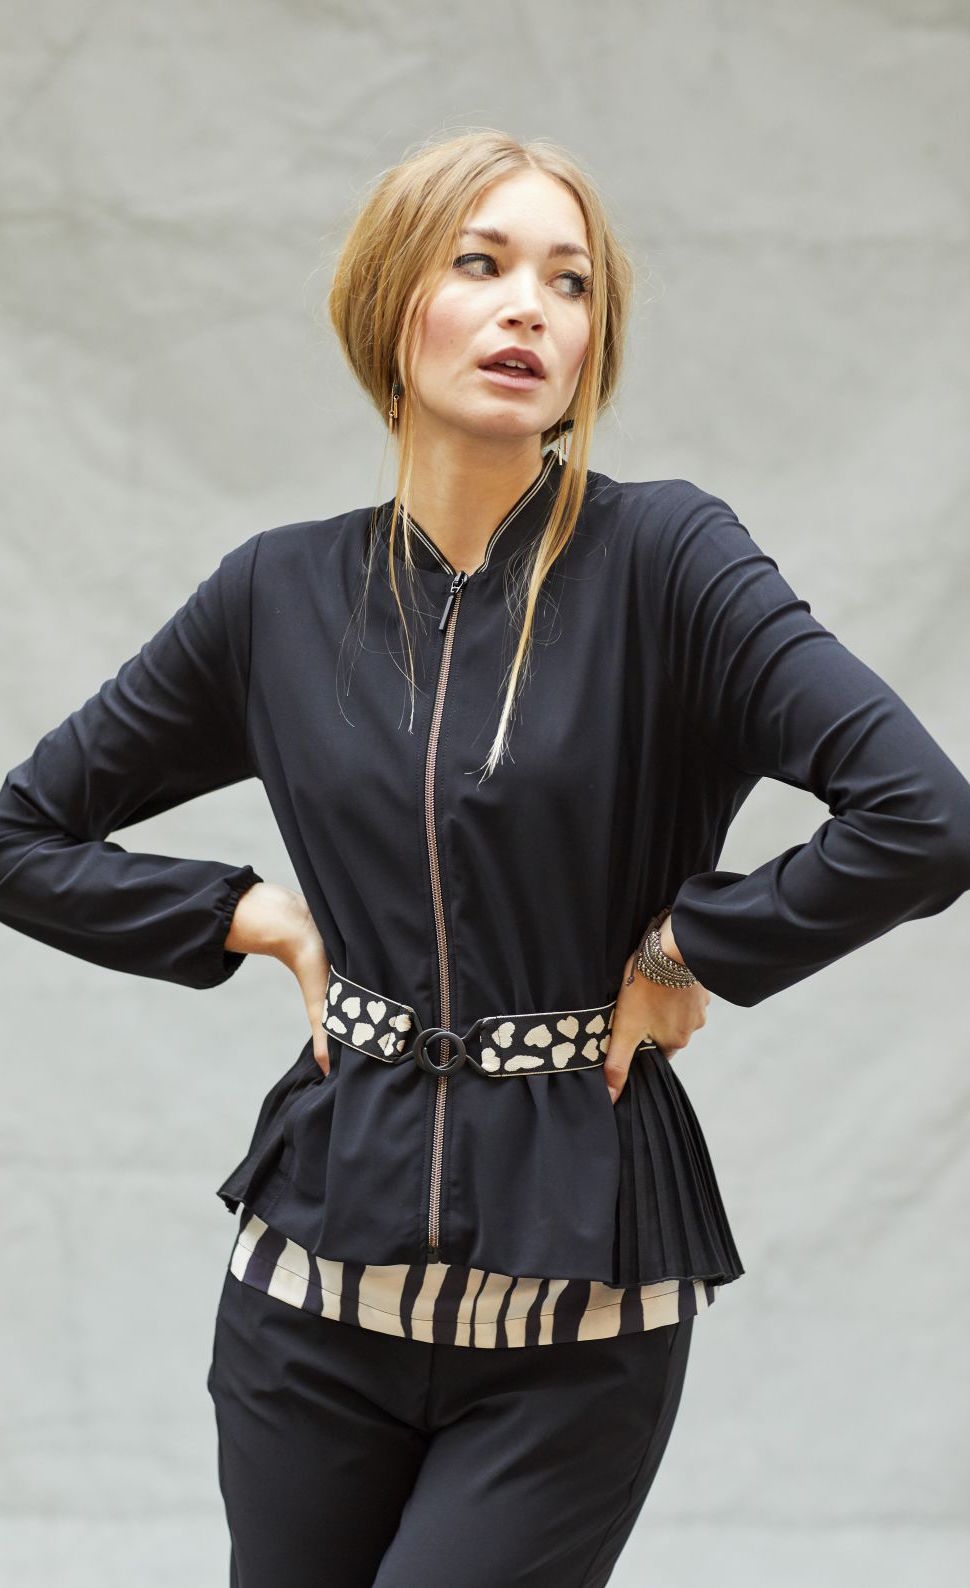 Front top half view of a woman wearing the indies black fute jacket. This jacket has a zip front, long sleeves, a short collar, and a belt with pink hearts around the waist.